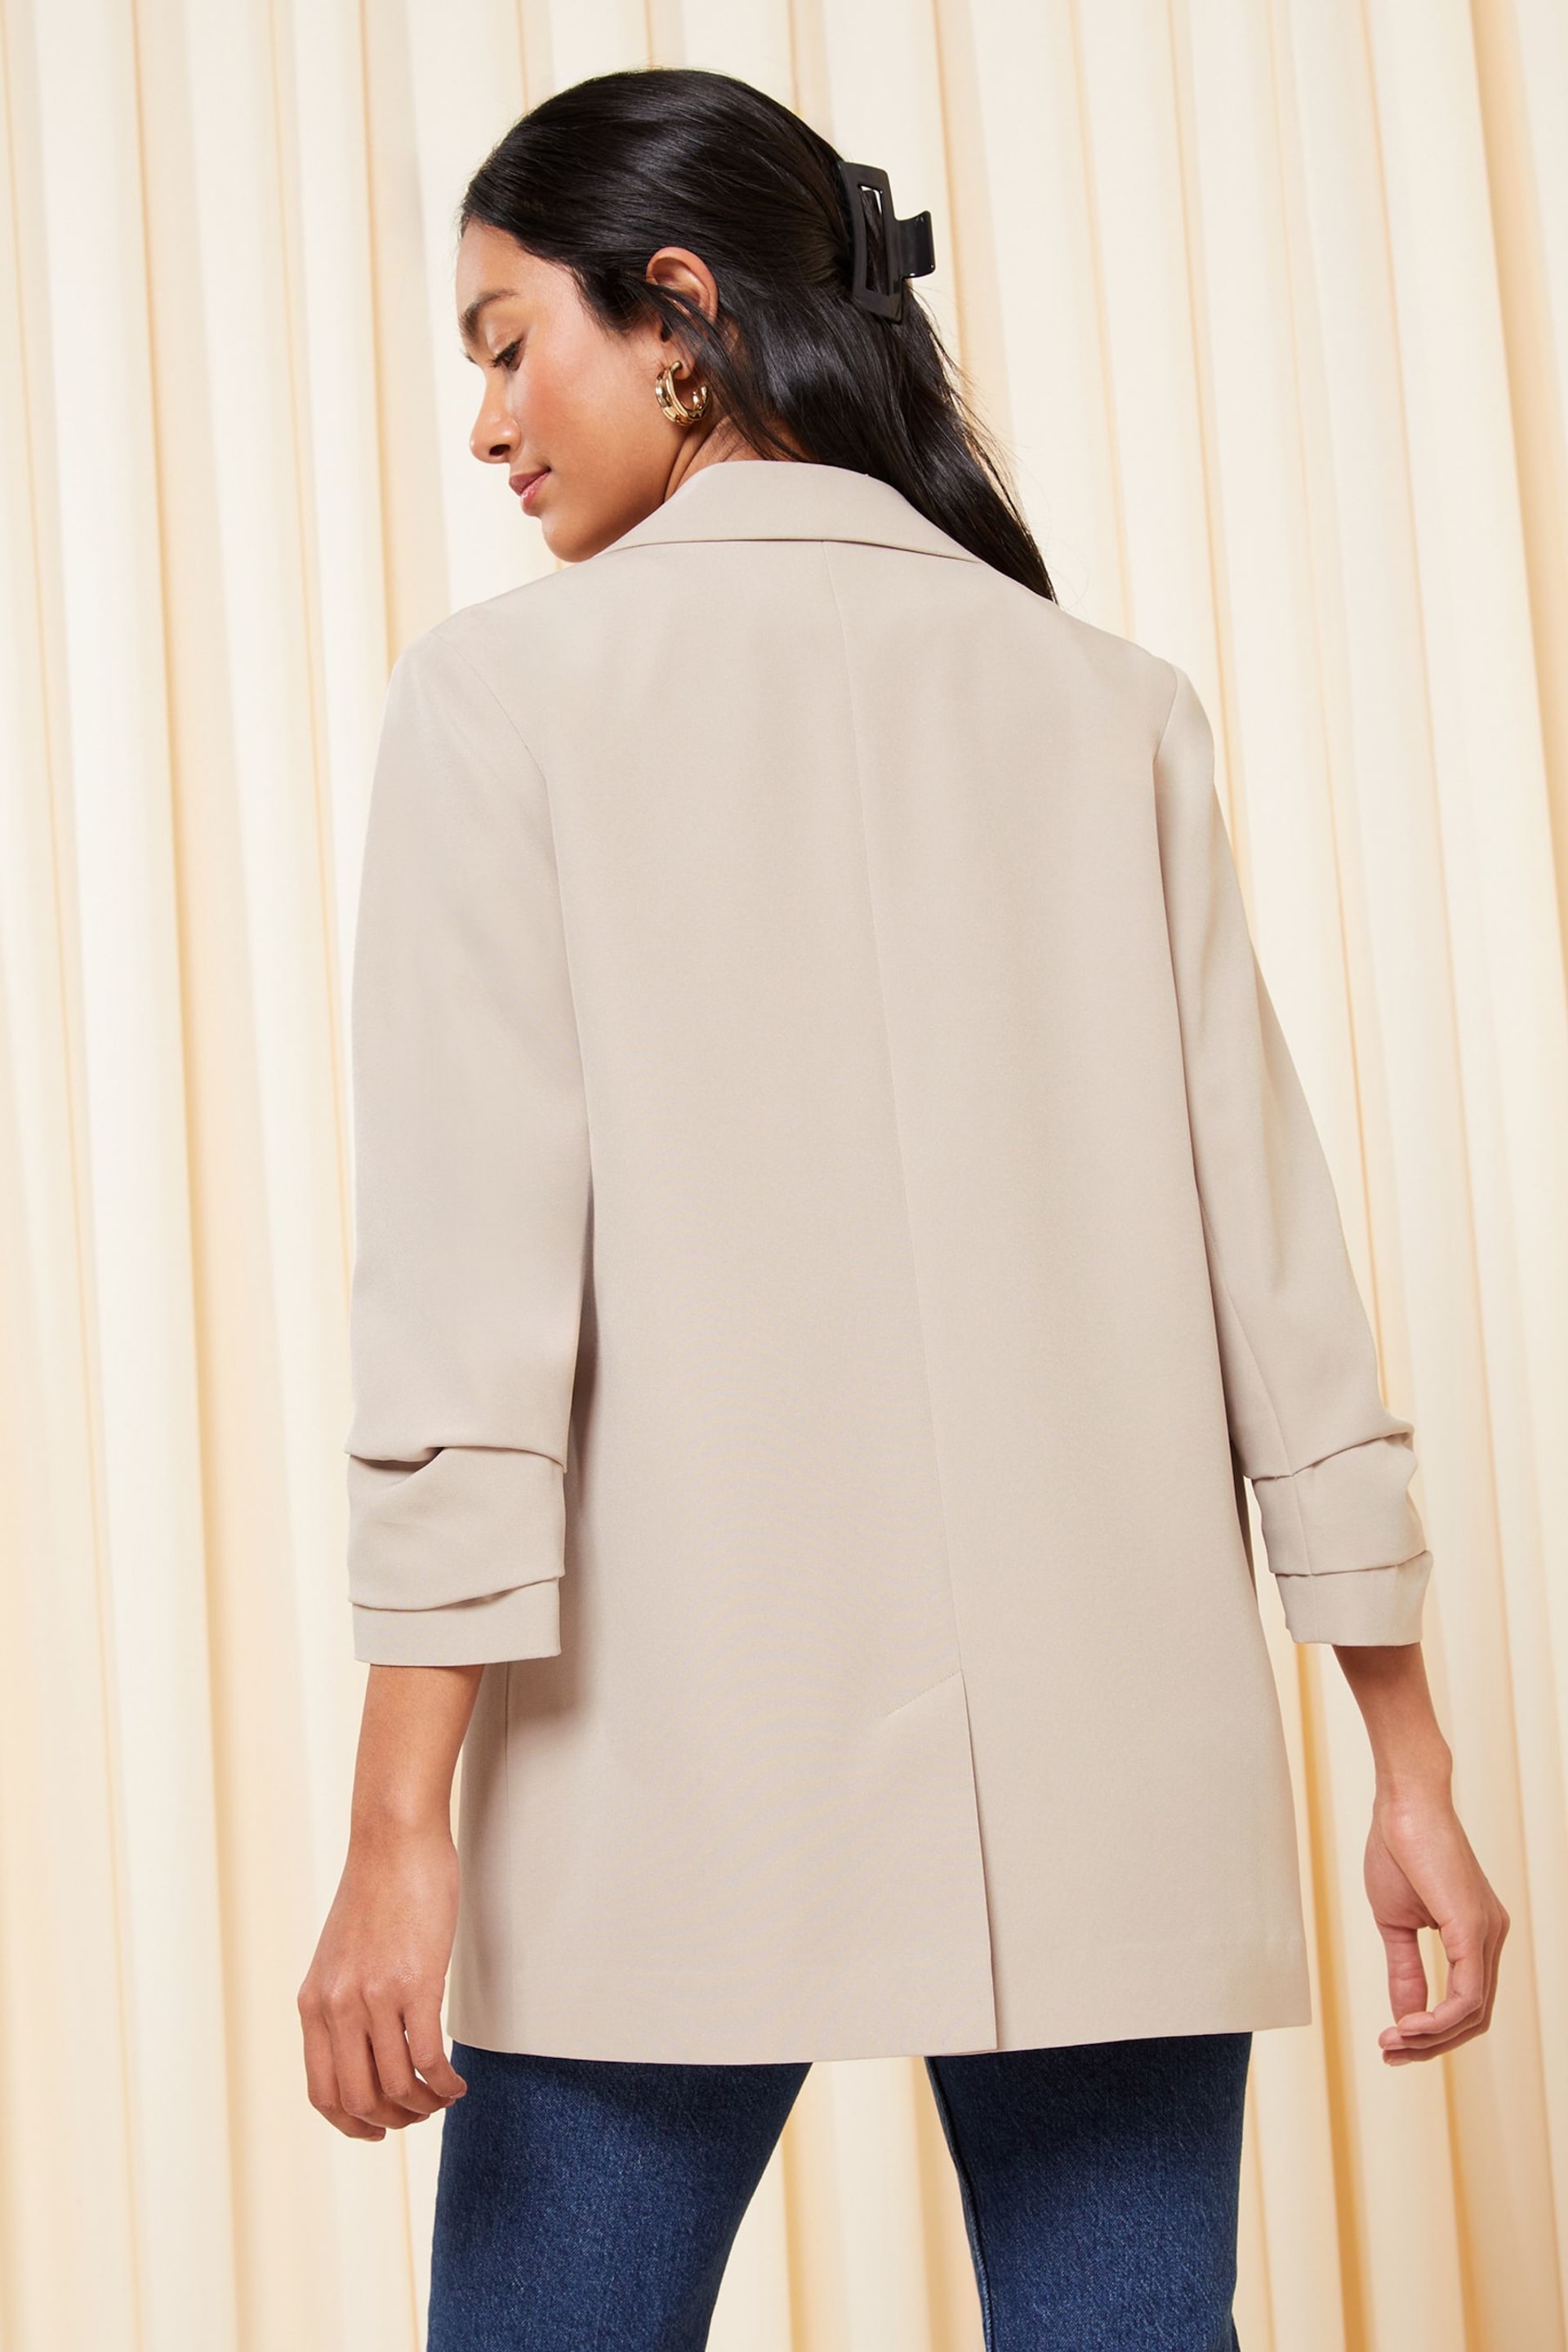 Friends Like These Taupe Brown Edge to Edge Tailored Blazer - Image 3 of 4